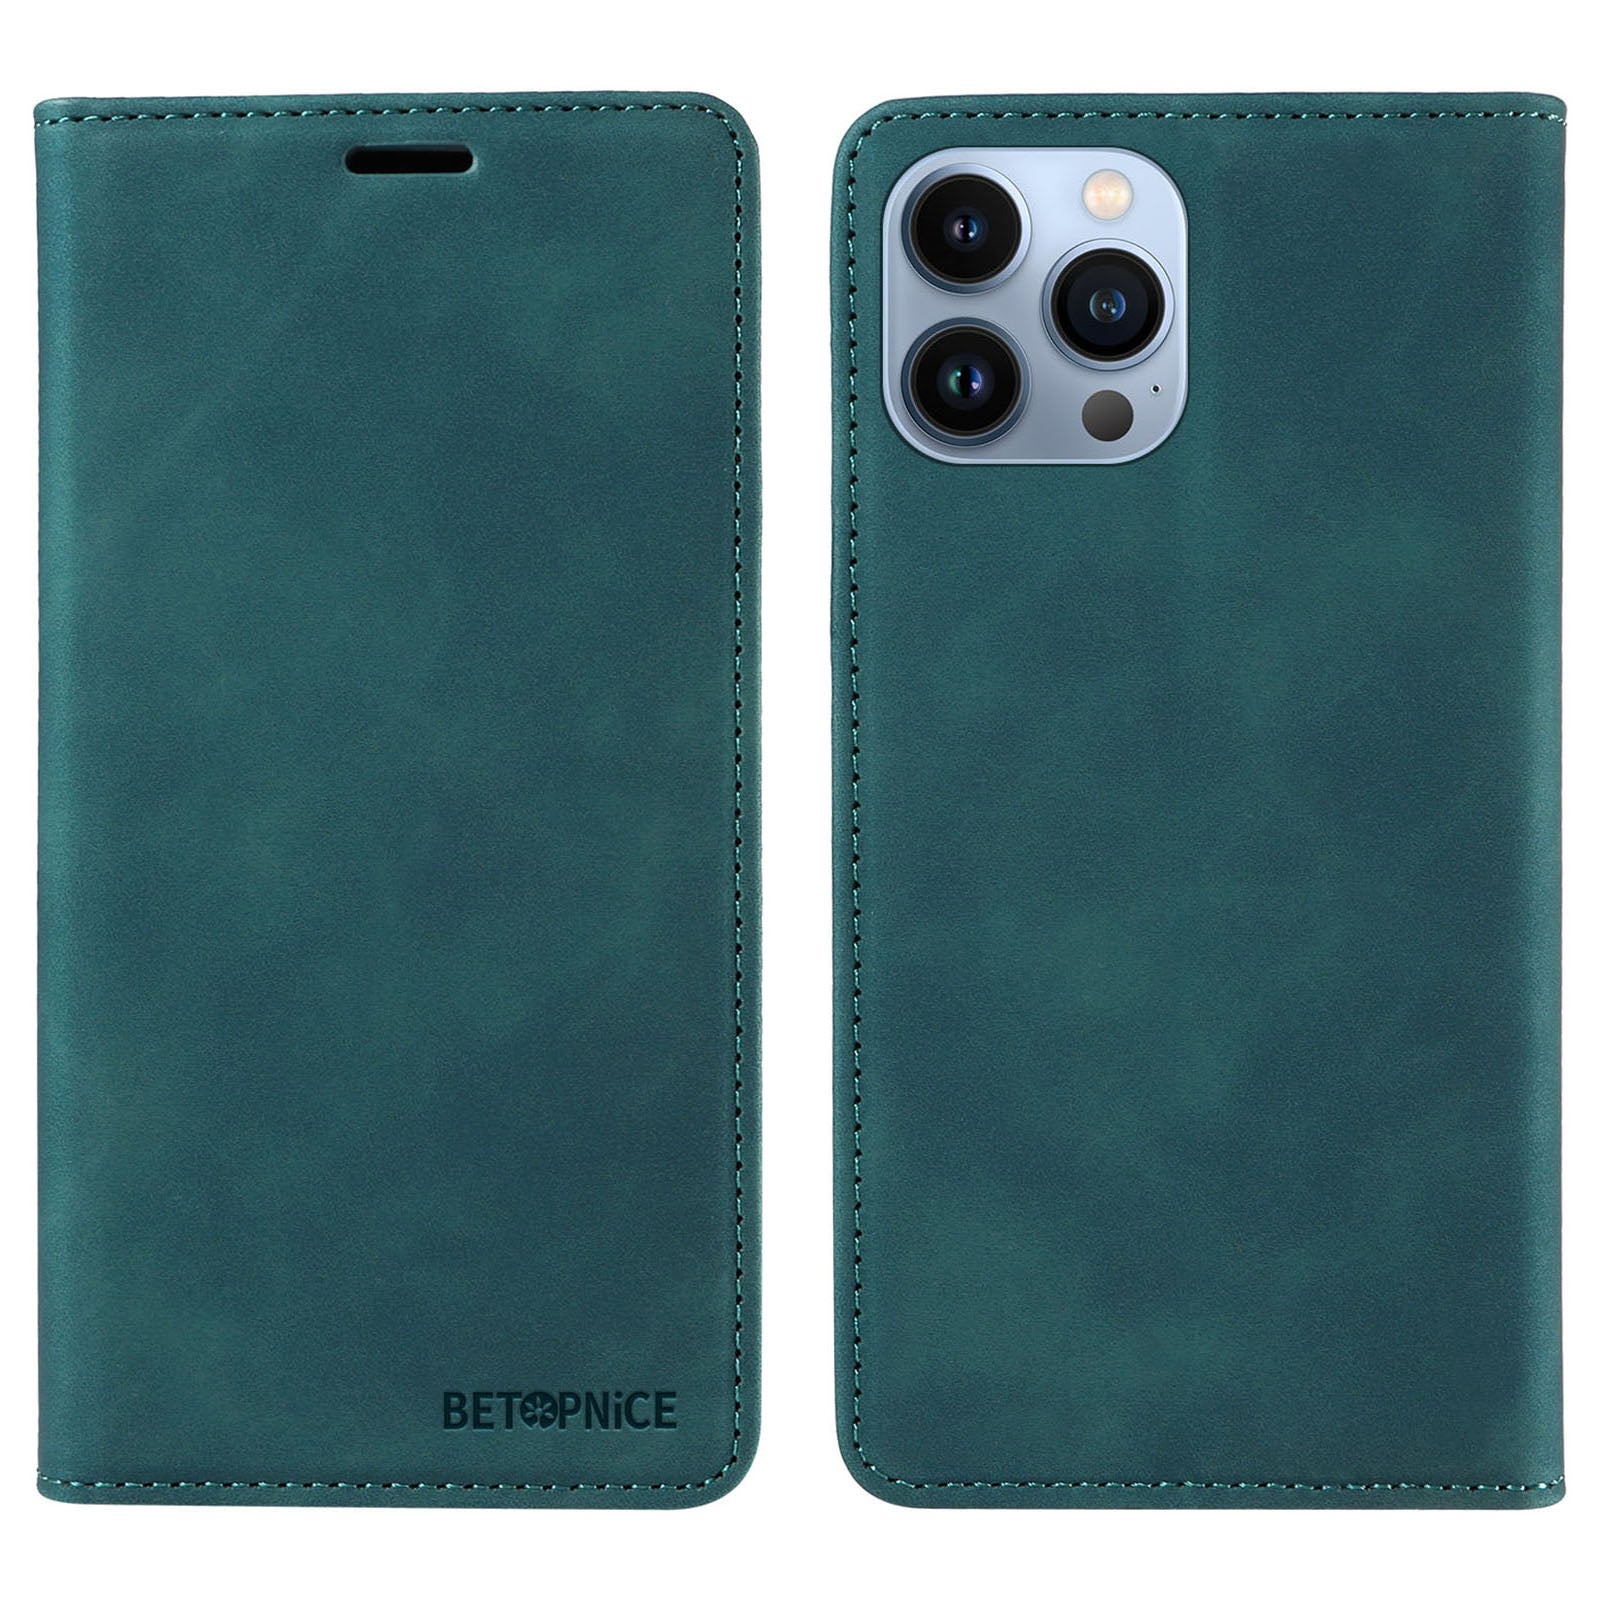 Uniqkart 003 For iPhone 12 Pro Max 6.7 inch Anti-scratch Phone Cover Wallet Leather Stand RFID Blocking Case - Green